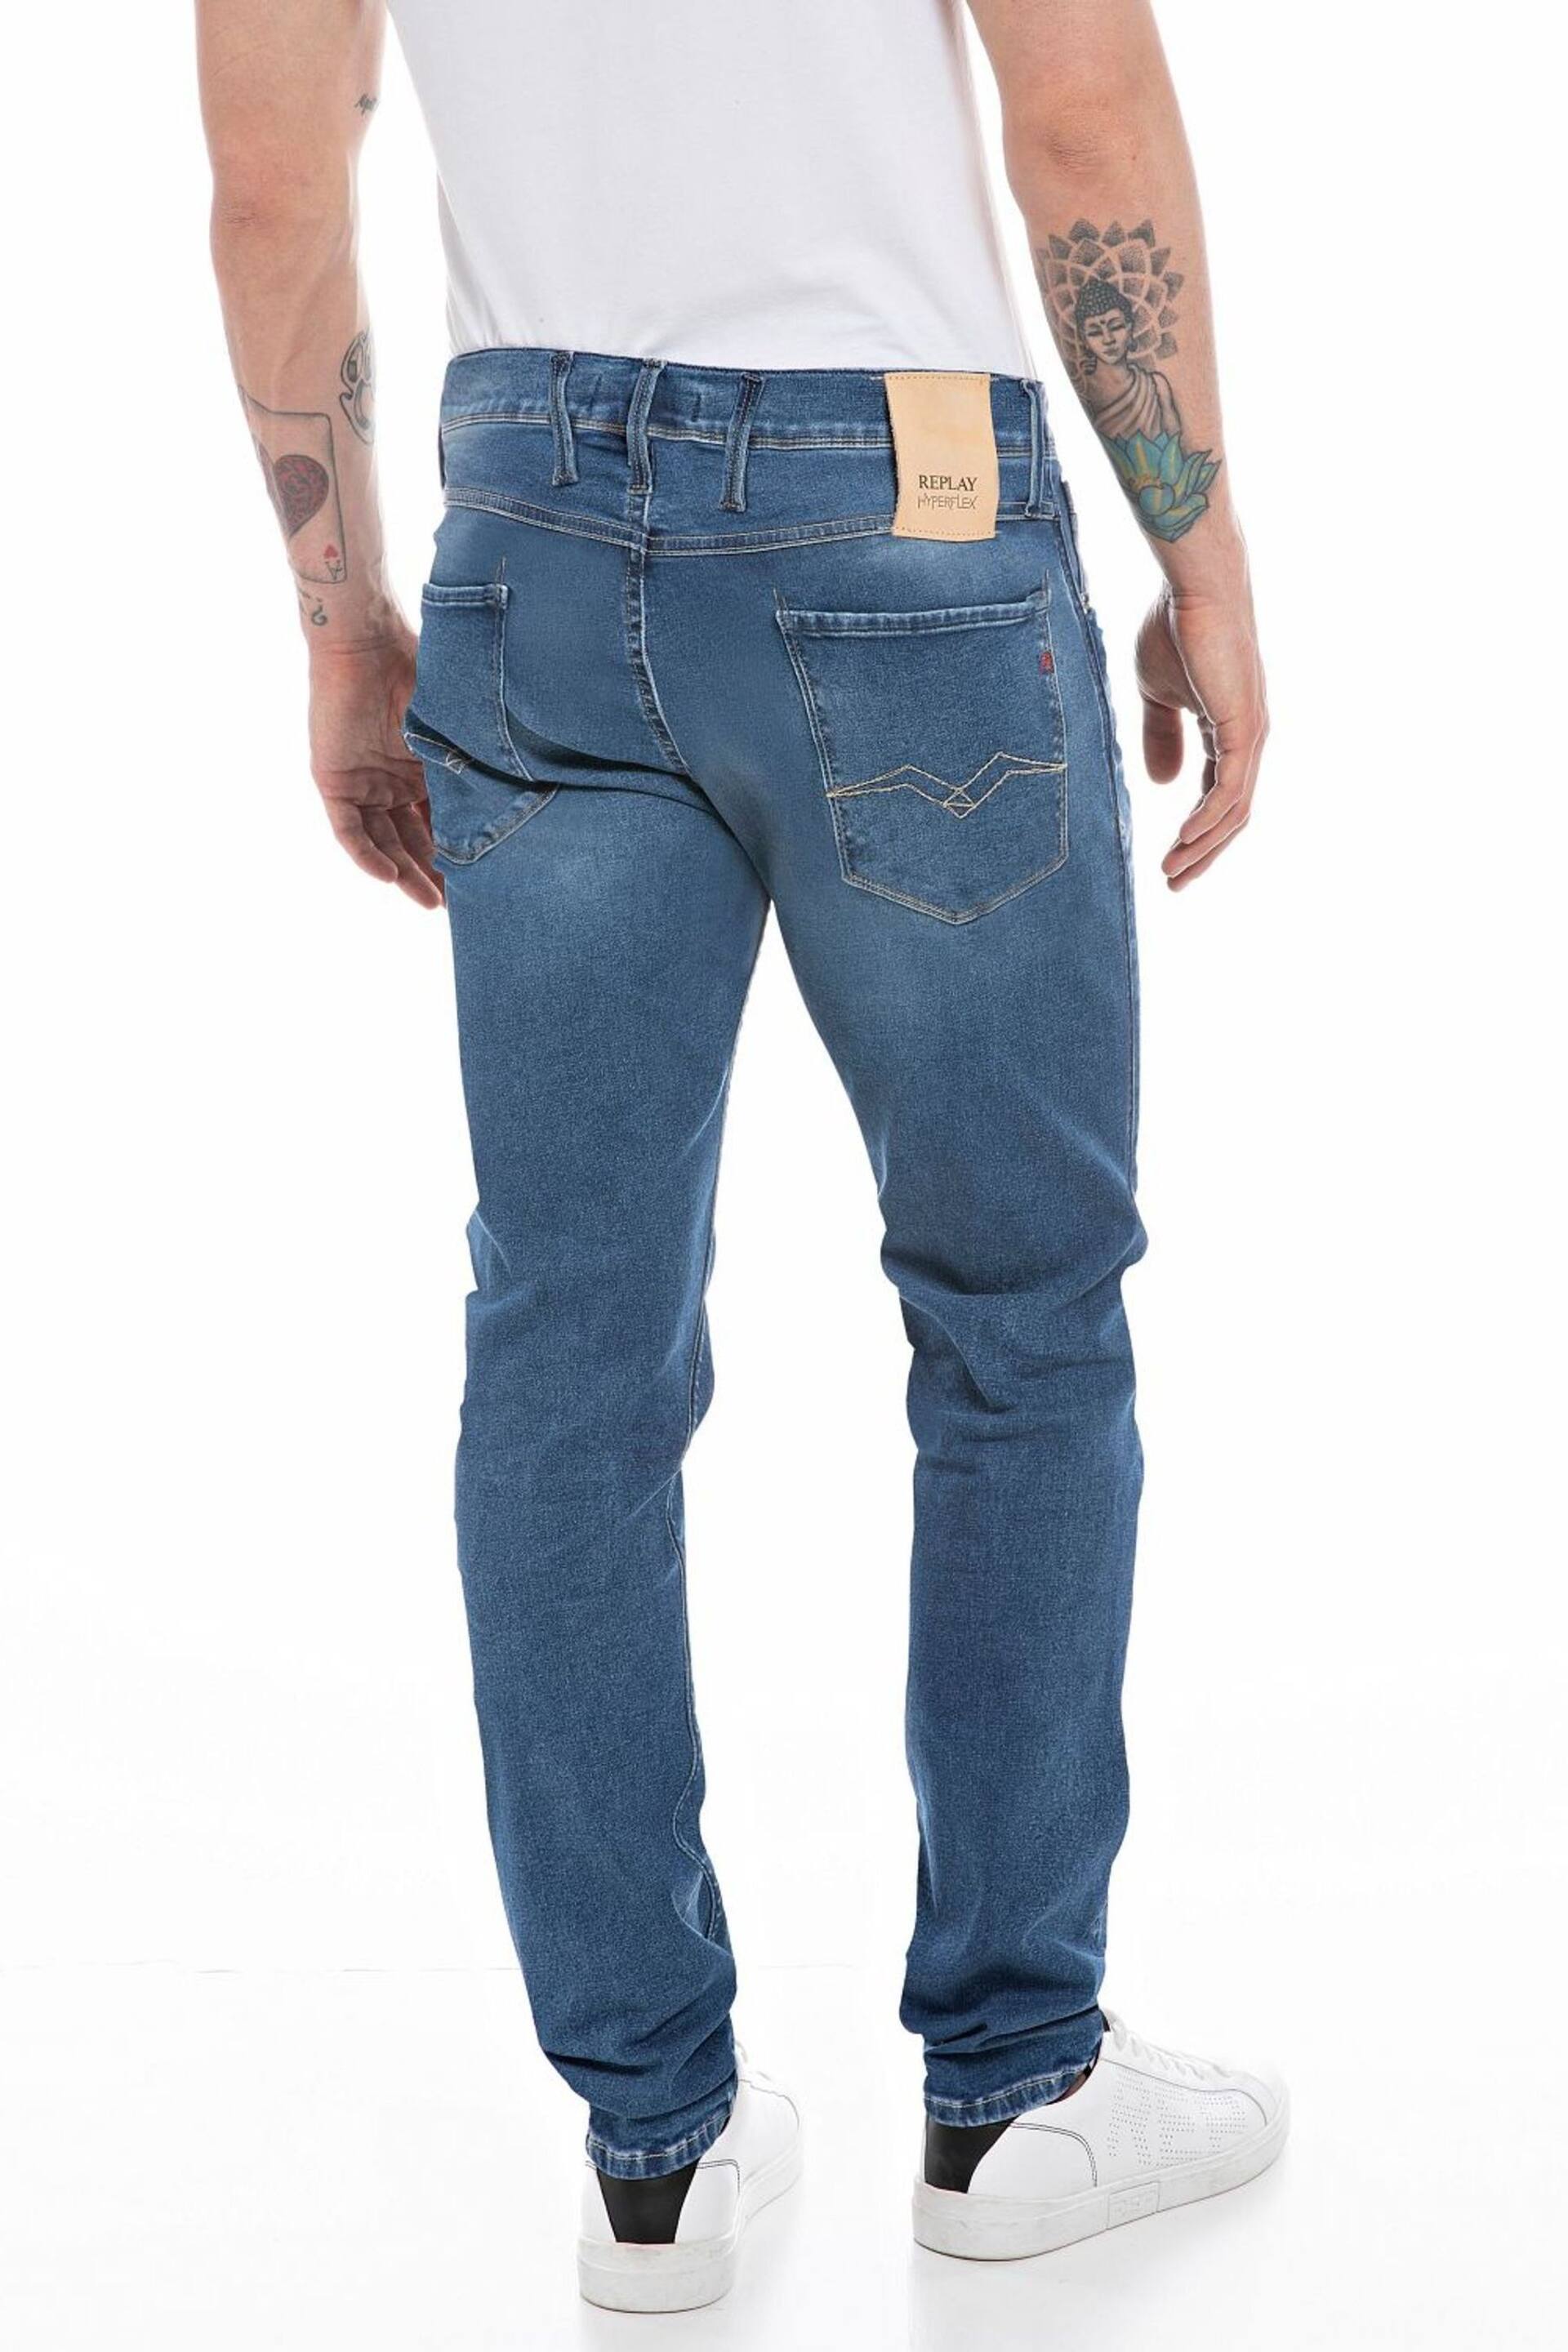 Replay Dark Blue Slim Fit Anbass Jeans - Image 2 of 2